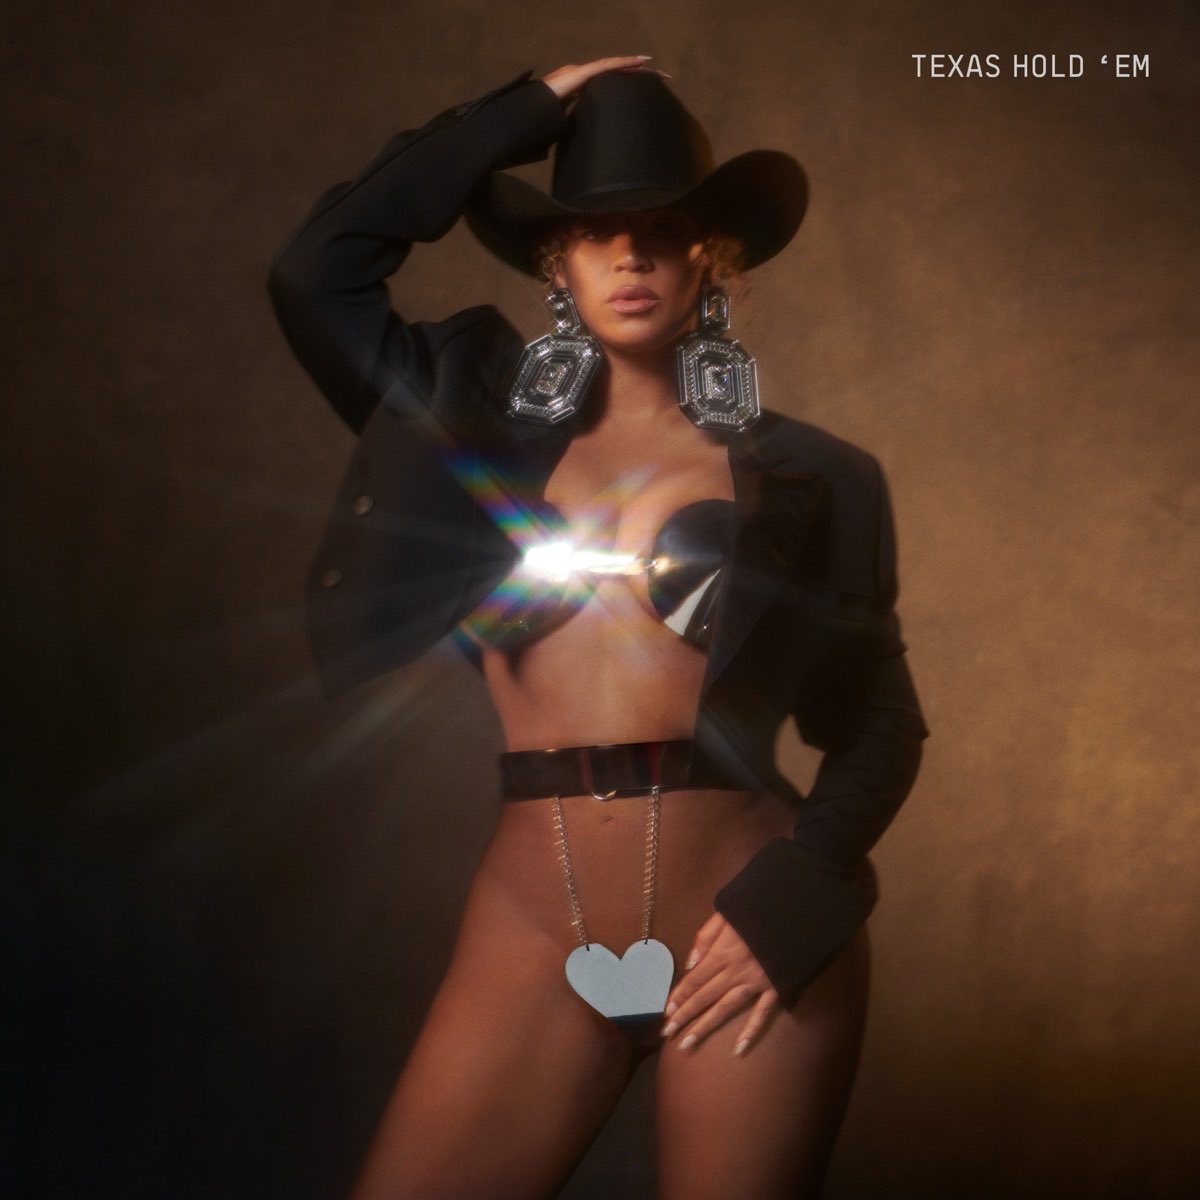 'Texas Hold'Em' is the only female solo single that has simultaneously topped all 3 major U.S. audio streaming platforms this year (Spotify, Apple Music, Amazon Music.)— @talkofthecharts